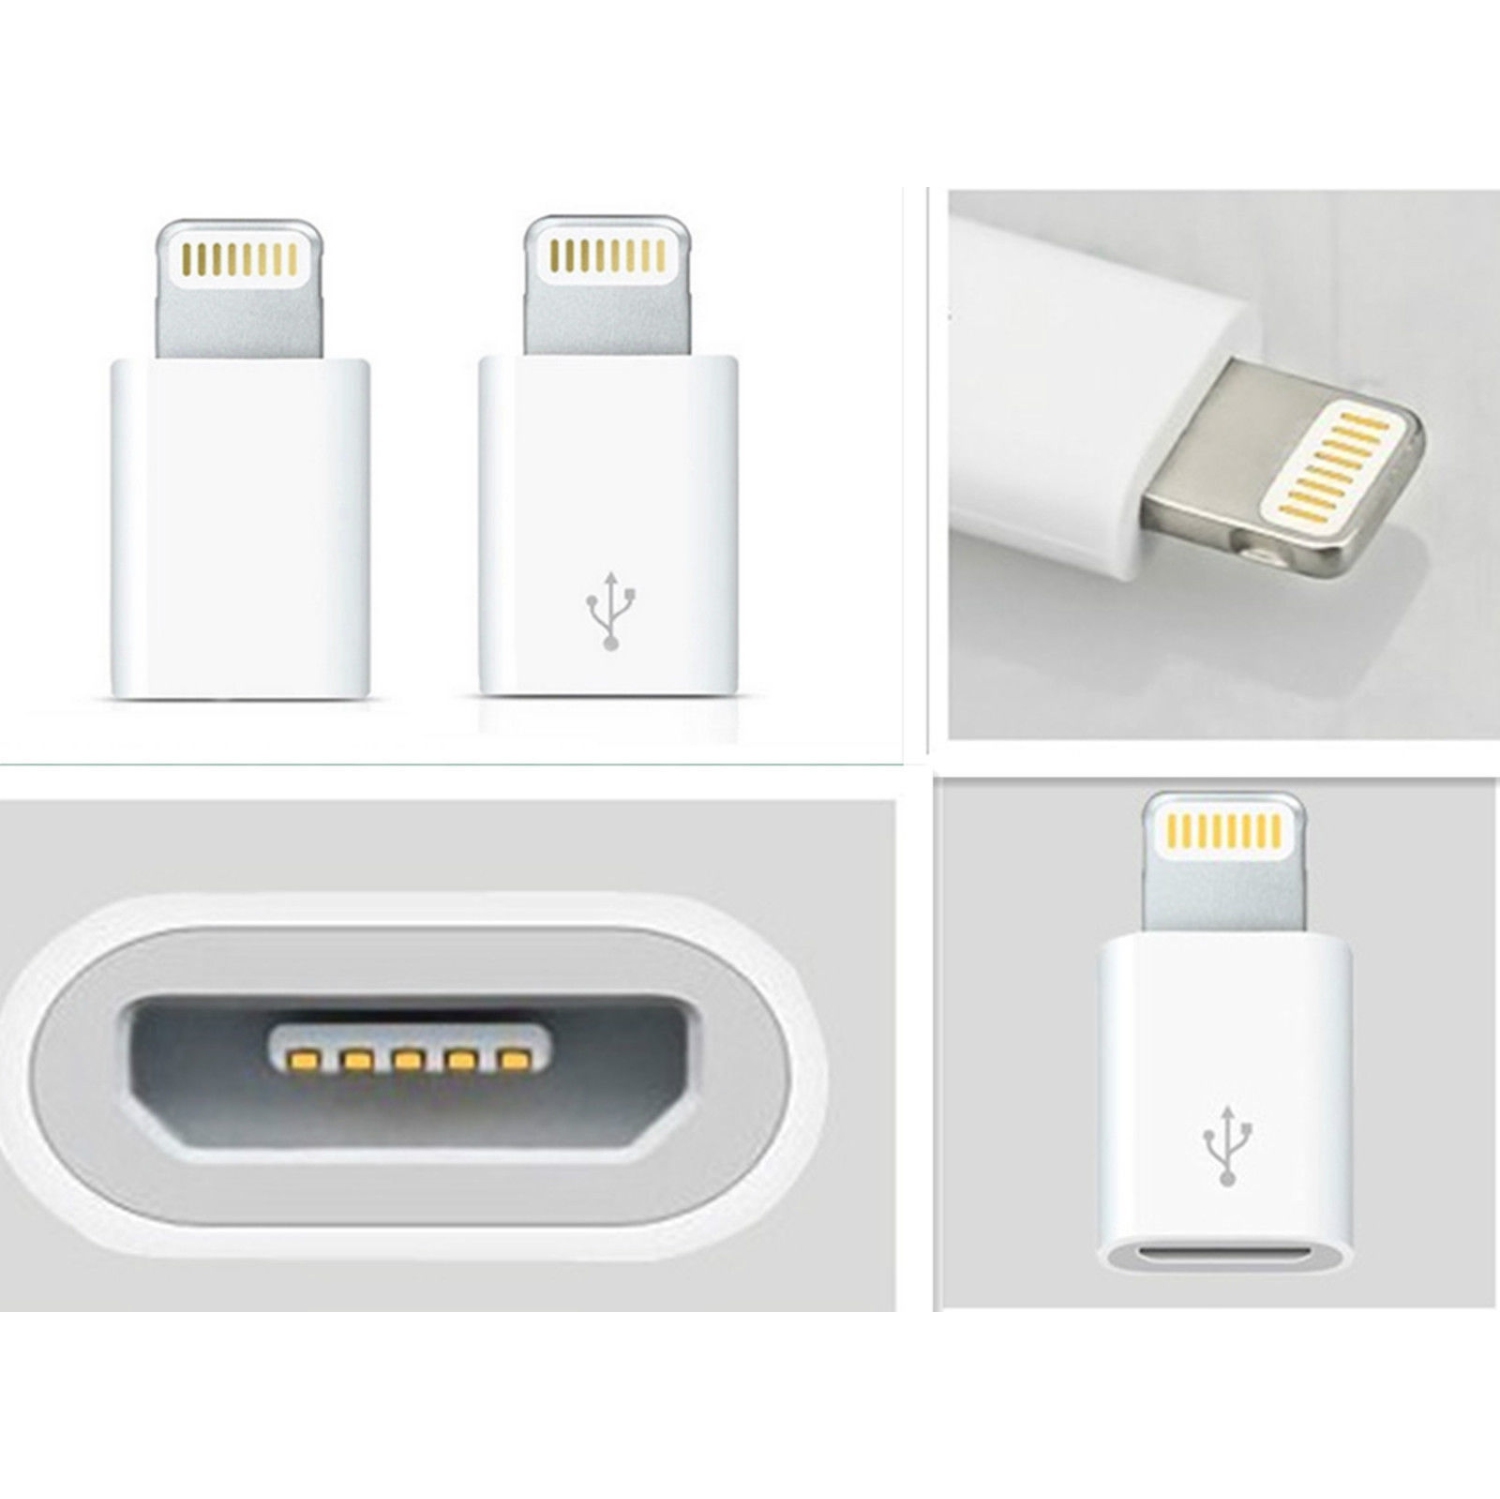 Micro USB to Lightning Charger Converter Adapter for iPhone 5 6 7 / iPad / Samsung Phones